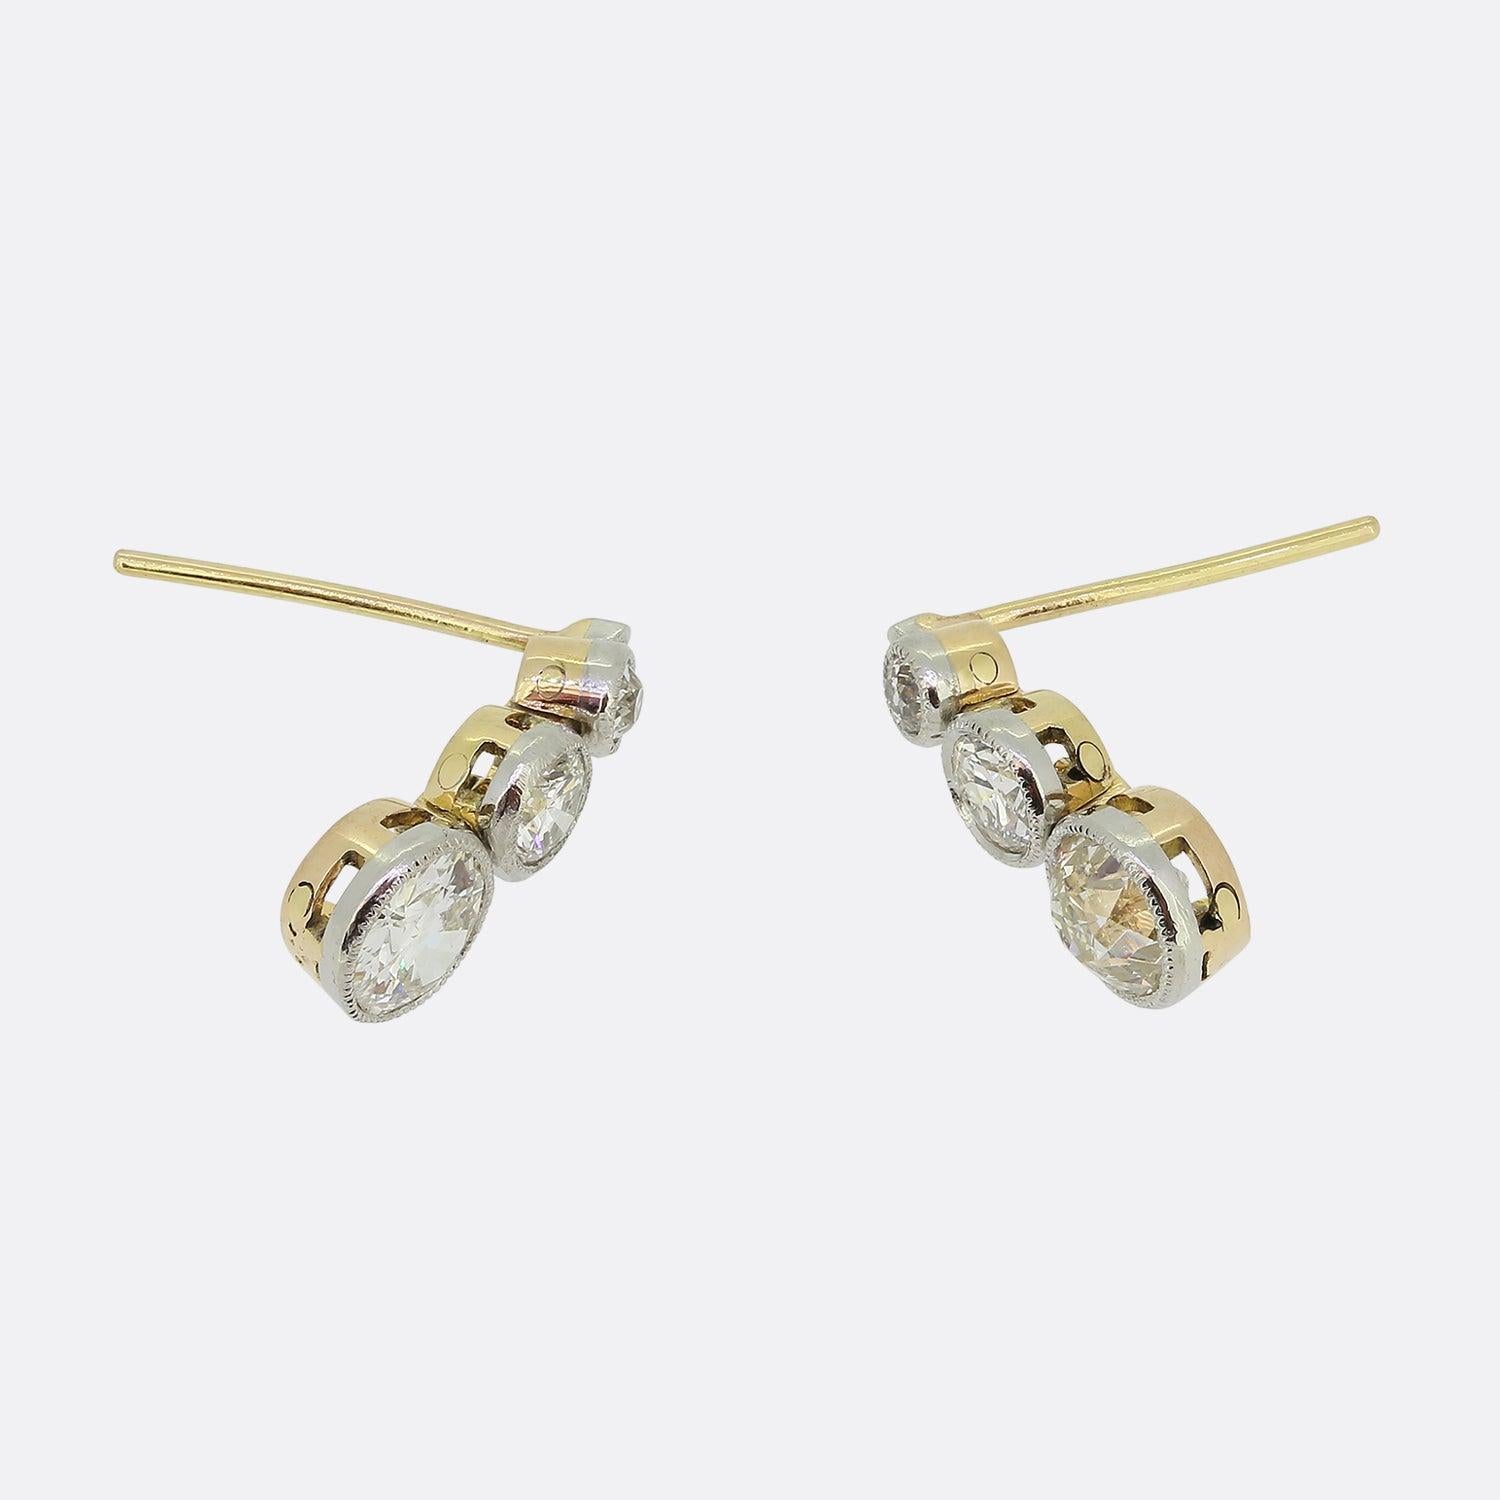 Here we have a wonderfully chic pair of 18ct yellow gold diamond drop earrings from the Edwardian era. Both pieces showcases a trio of round faceted old cut diamonds; each of which has been meticulously milgrain set in platinum and collectively